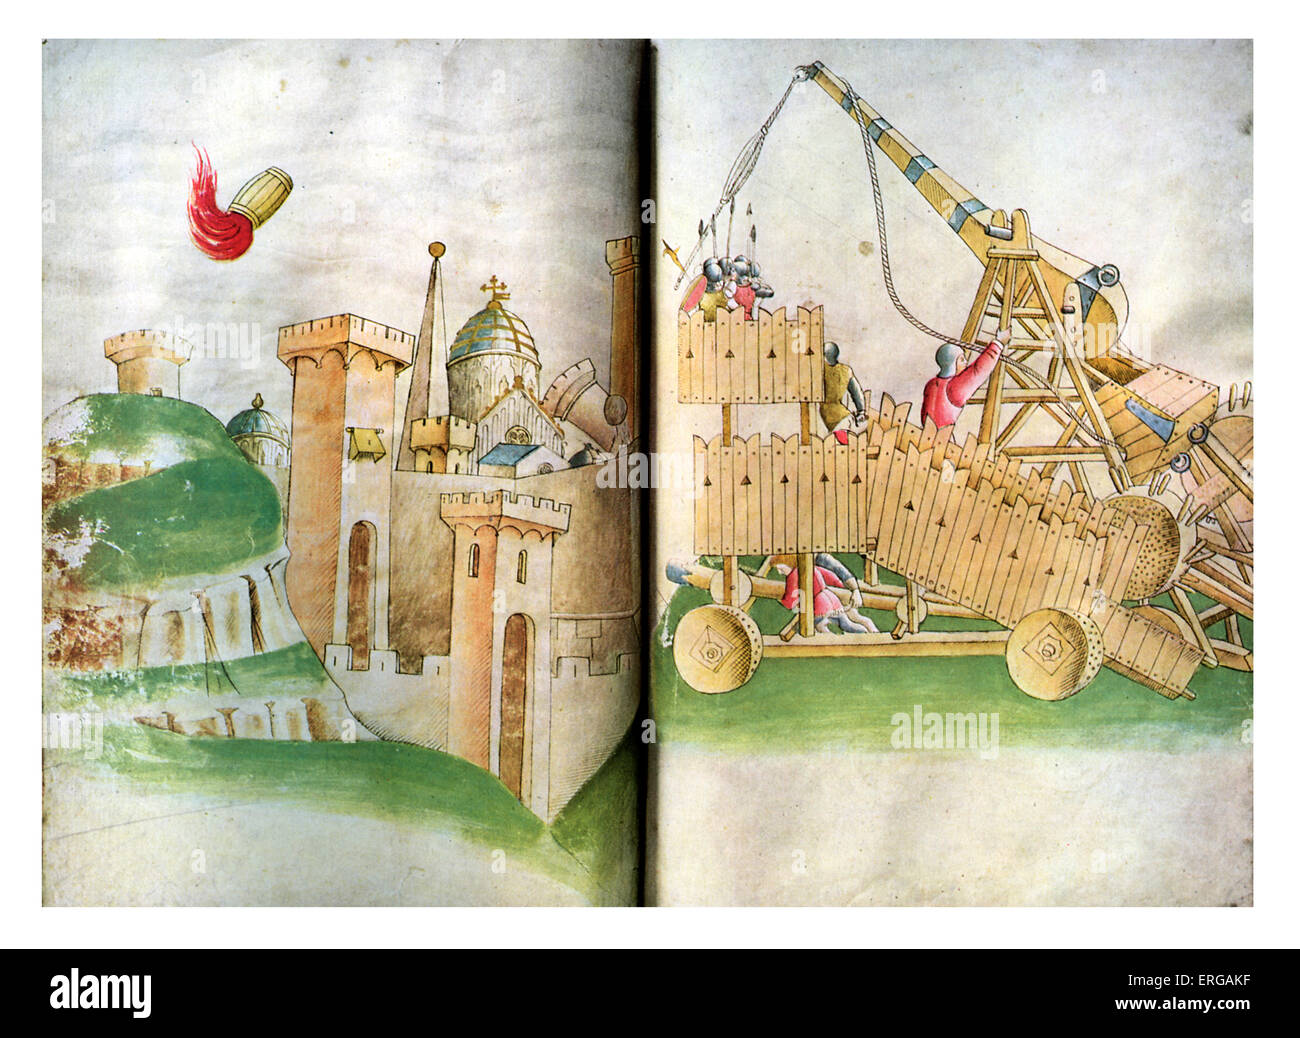 Besieging a walled city in the 16th century. Double page of a manuscript (probably from the 16th century) showing method of Stock Photo